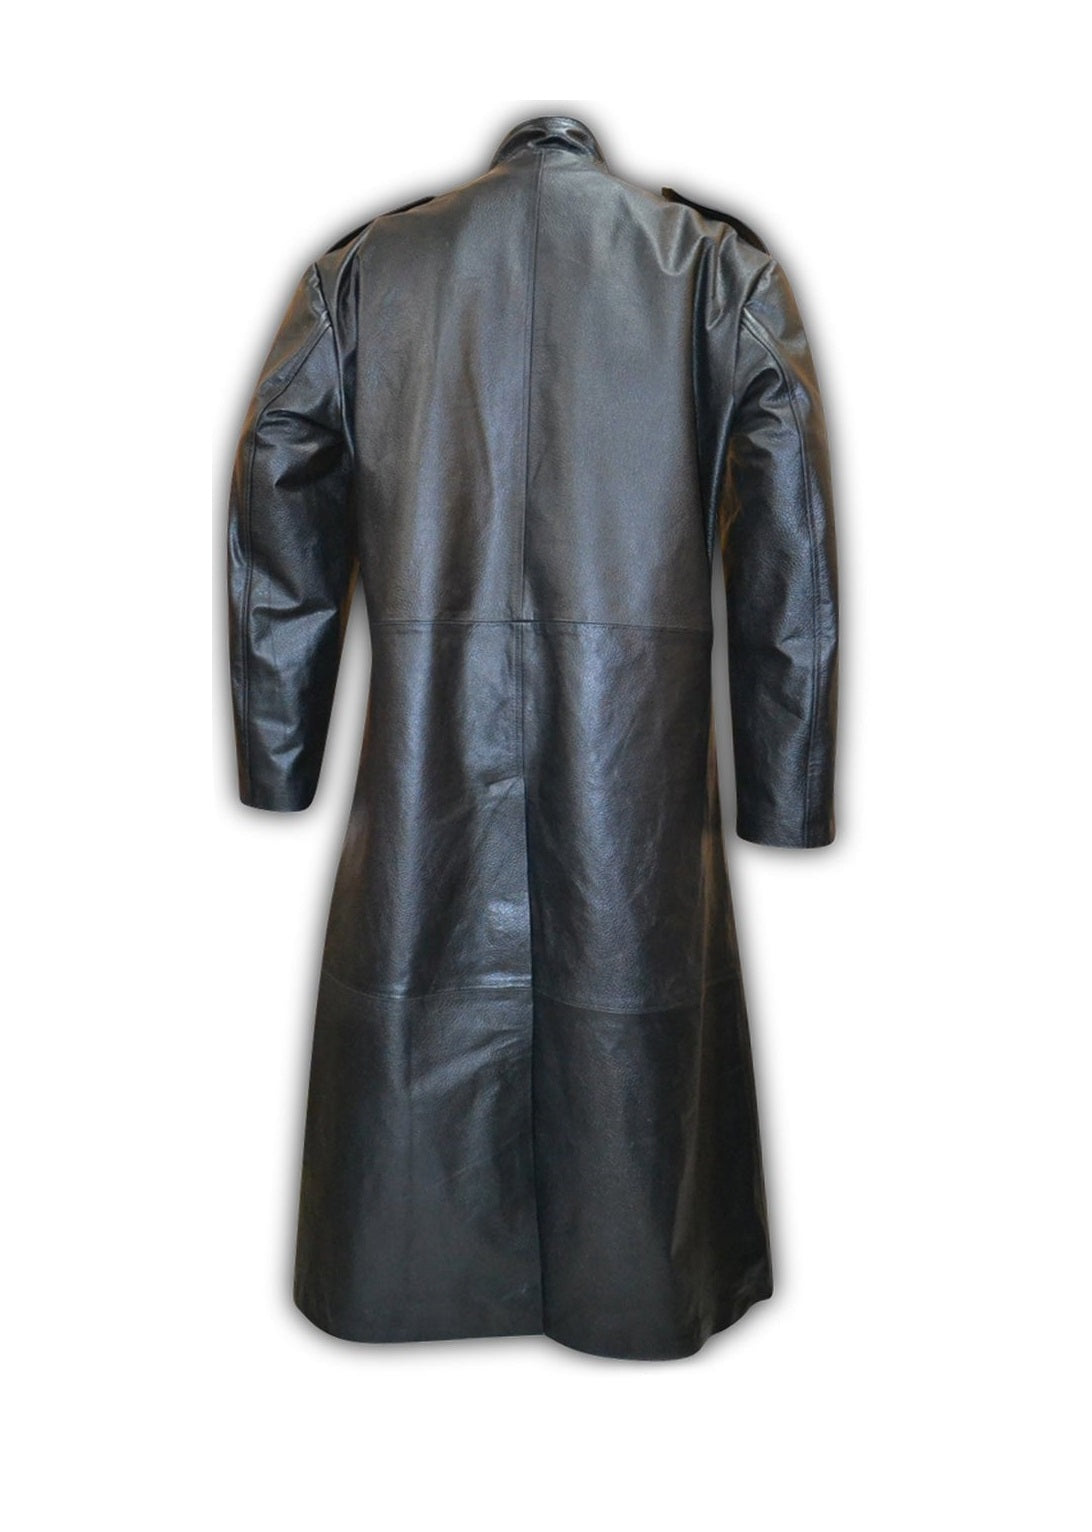 Mens Leather Imperial Military Royal Trench Long Coat